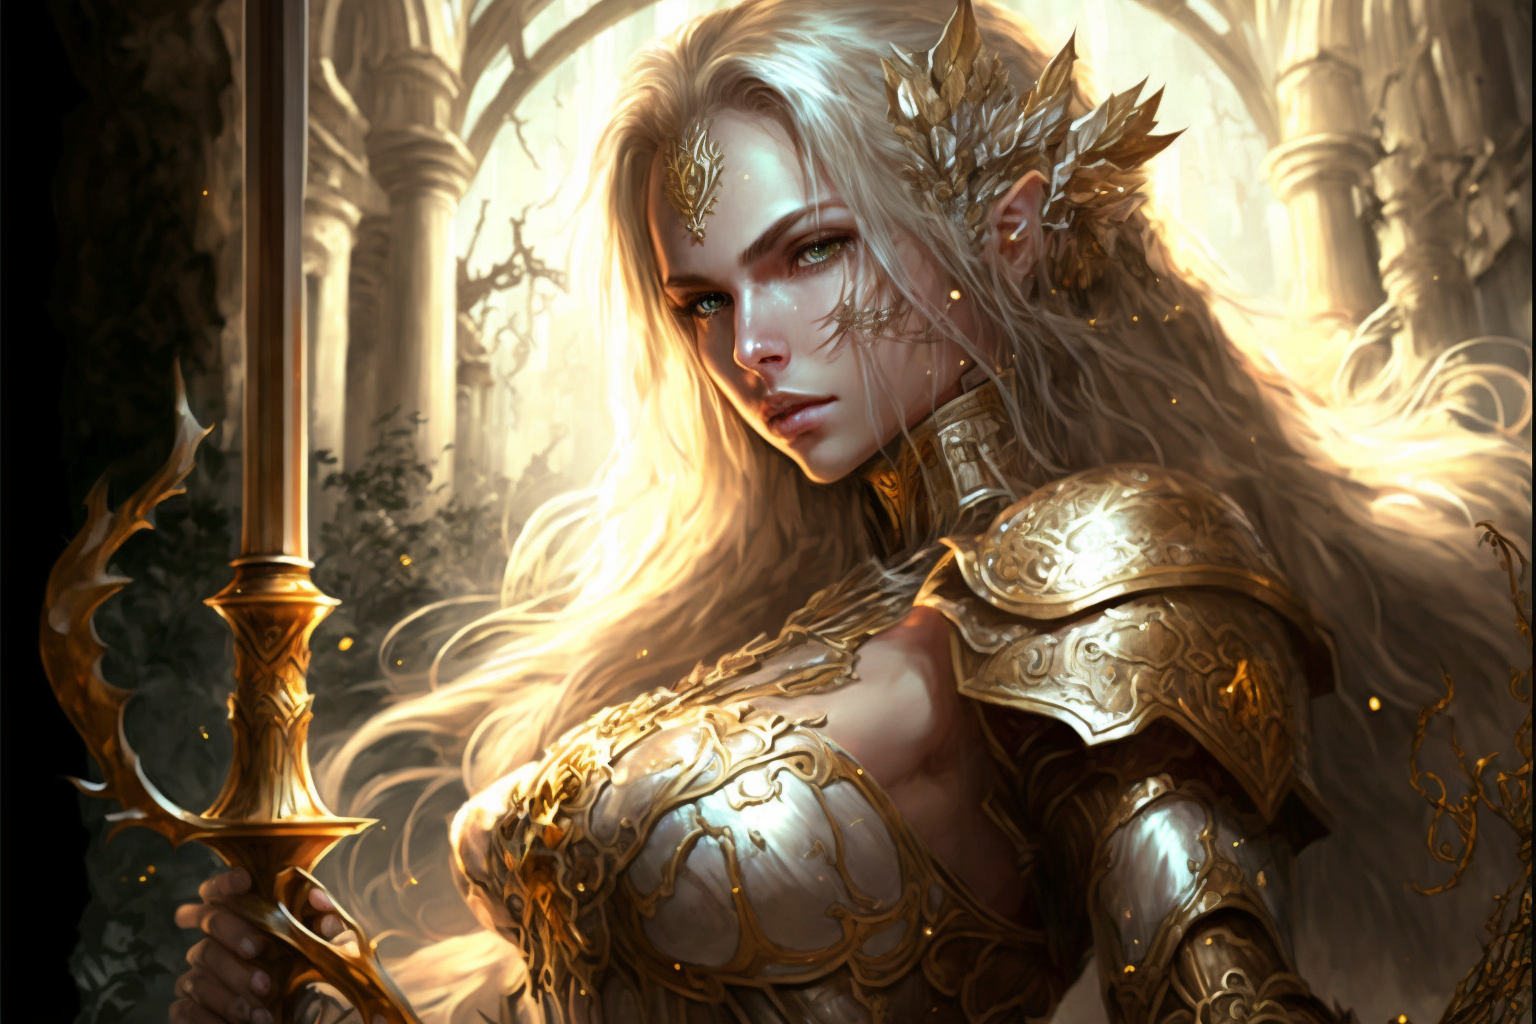 MELVIN_woman_elf_lineage_2_warrior_gold_darkness_beam_of_light__d6c45118-58f9-415b-bb47-089012...png